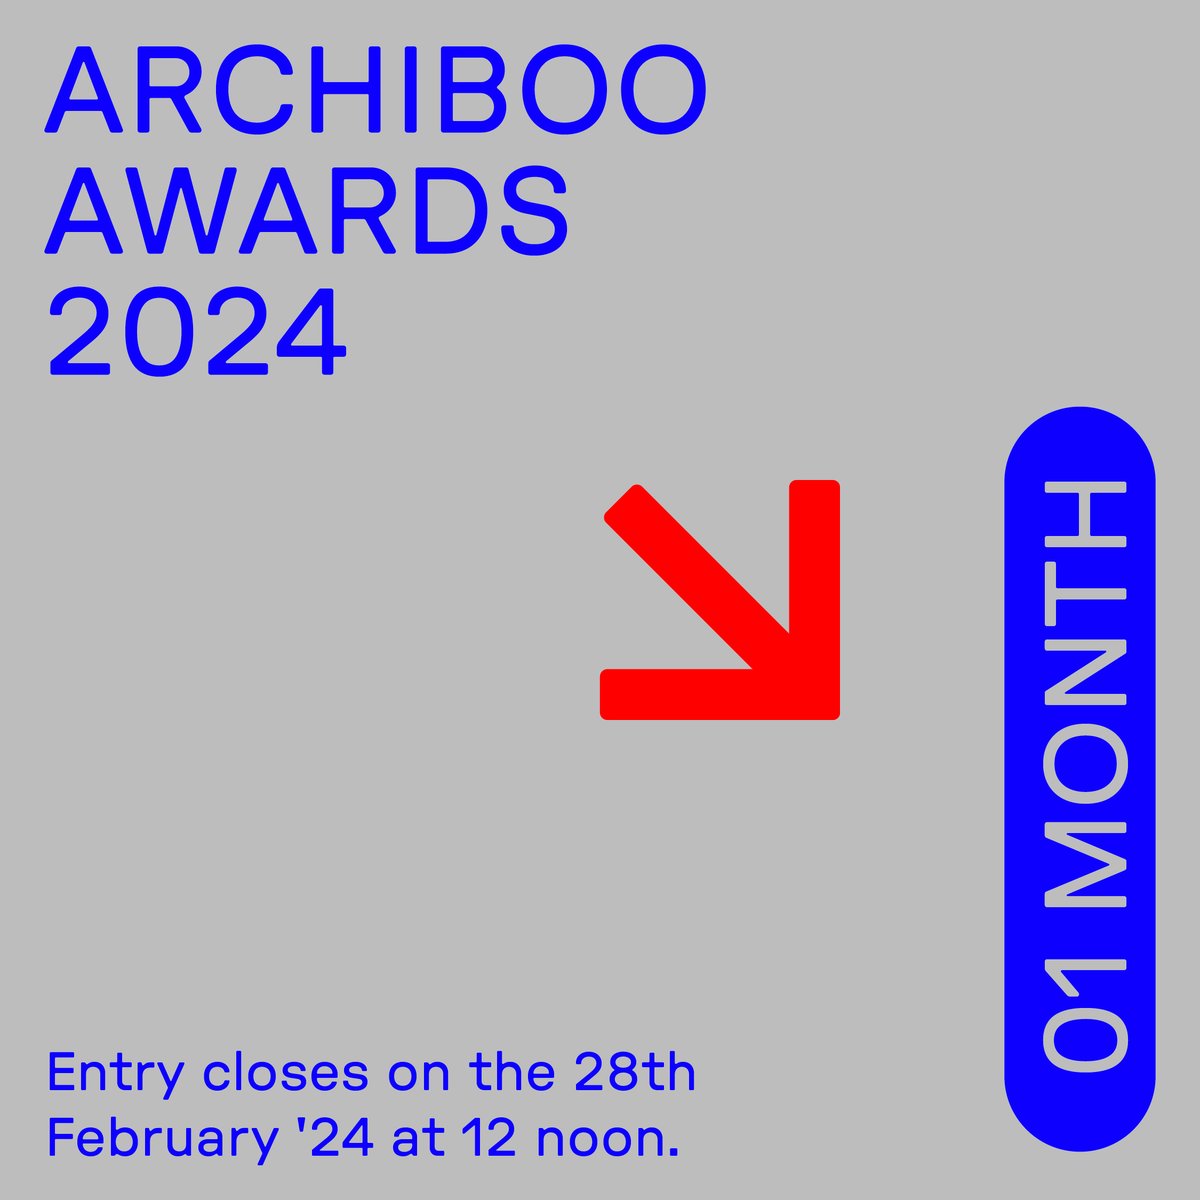 🚨 Just under one month to go until the Archiboo Awards Deadline 🚨 Whether you're an architect pushing boundaries or a designer delivering slick websites, this is your chance to shine! Submit your entry before the 28th of February. archibooawards.com